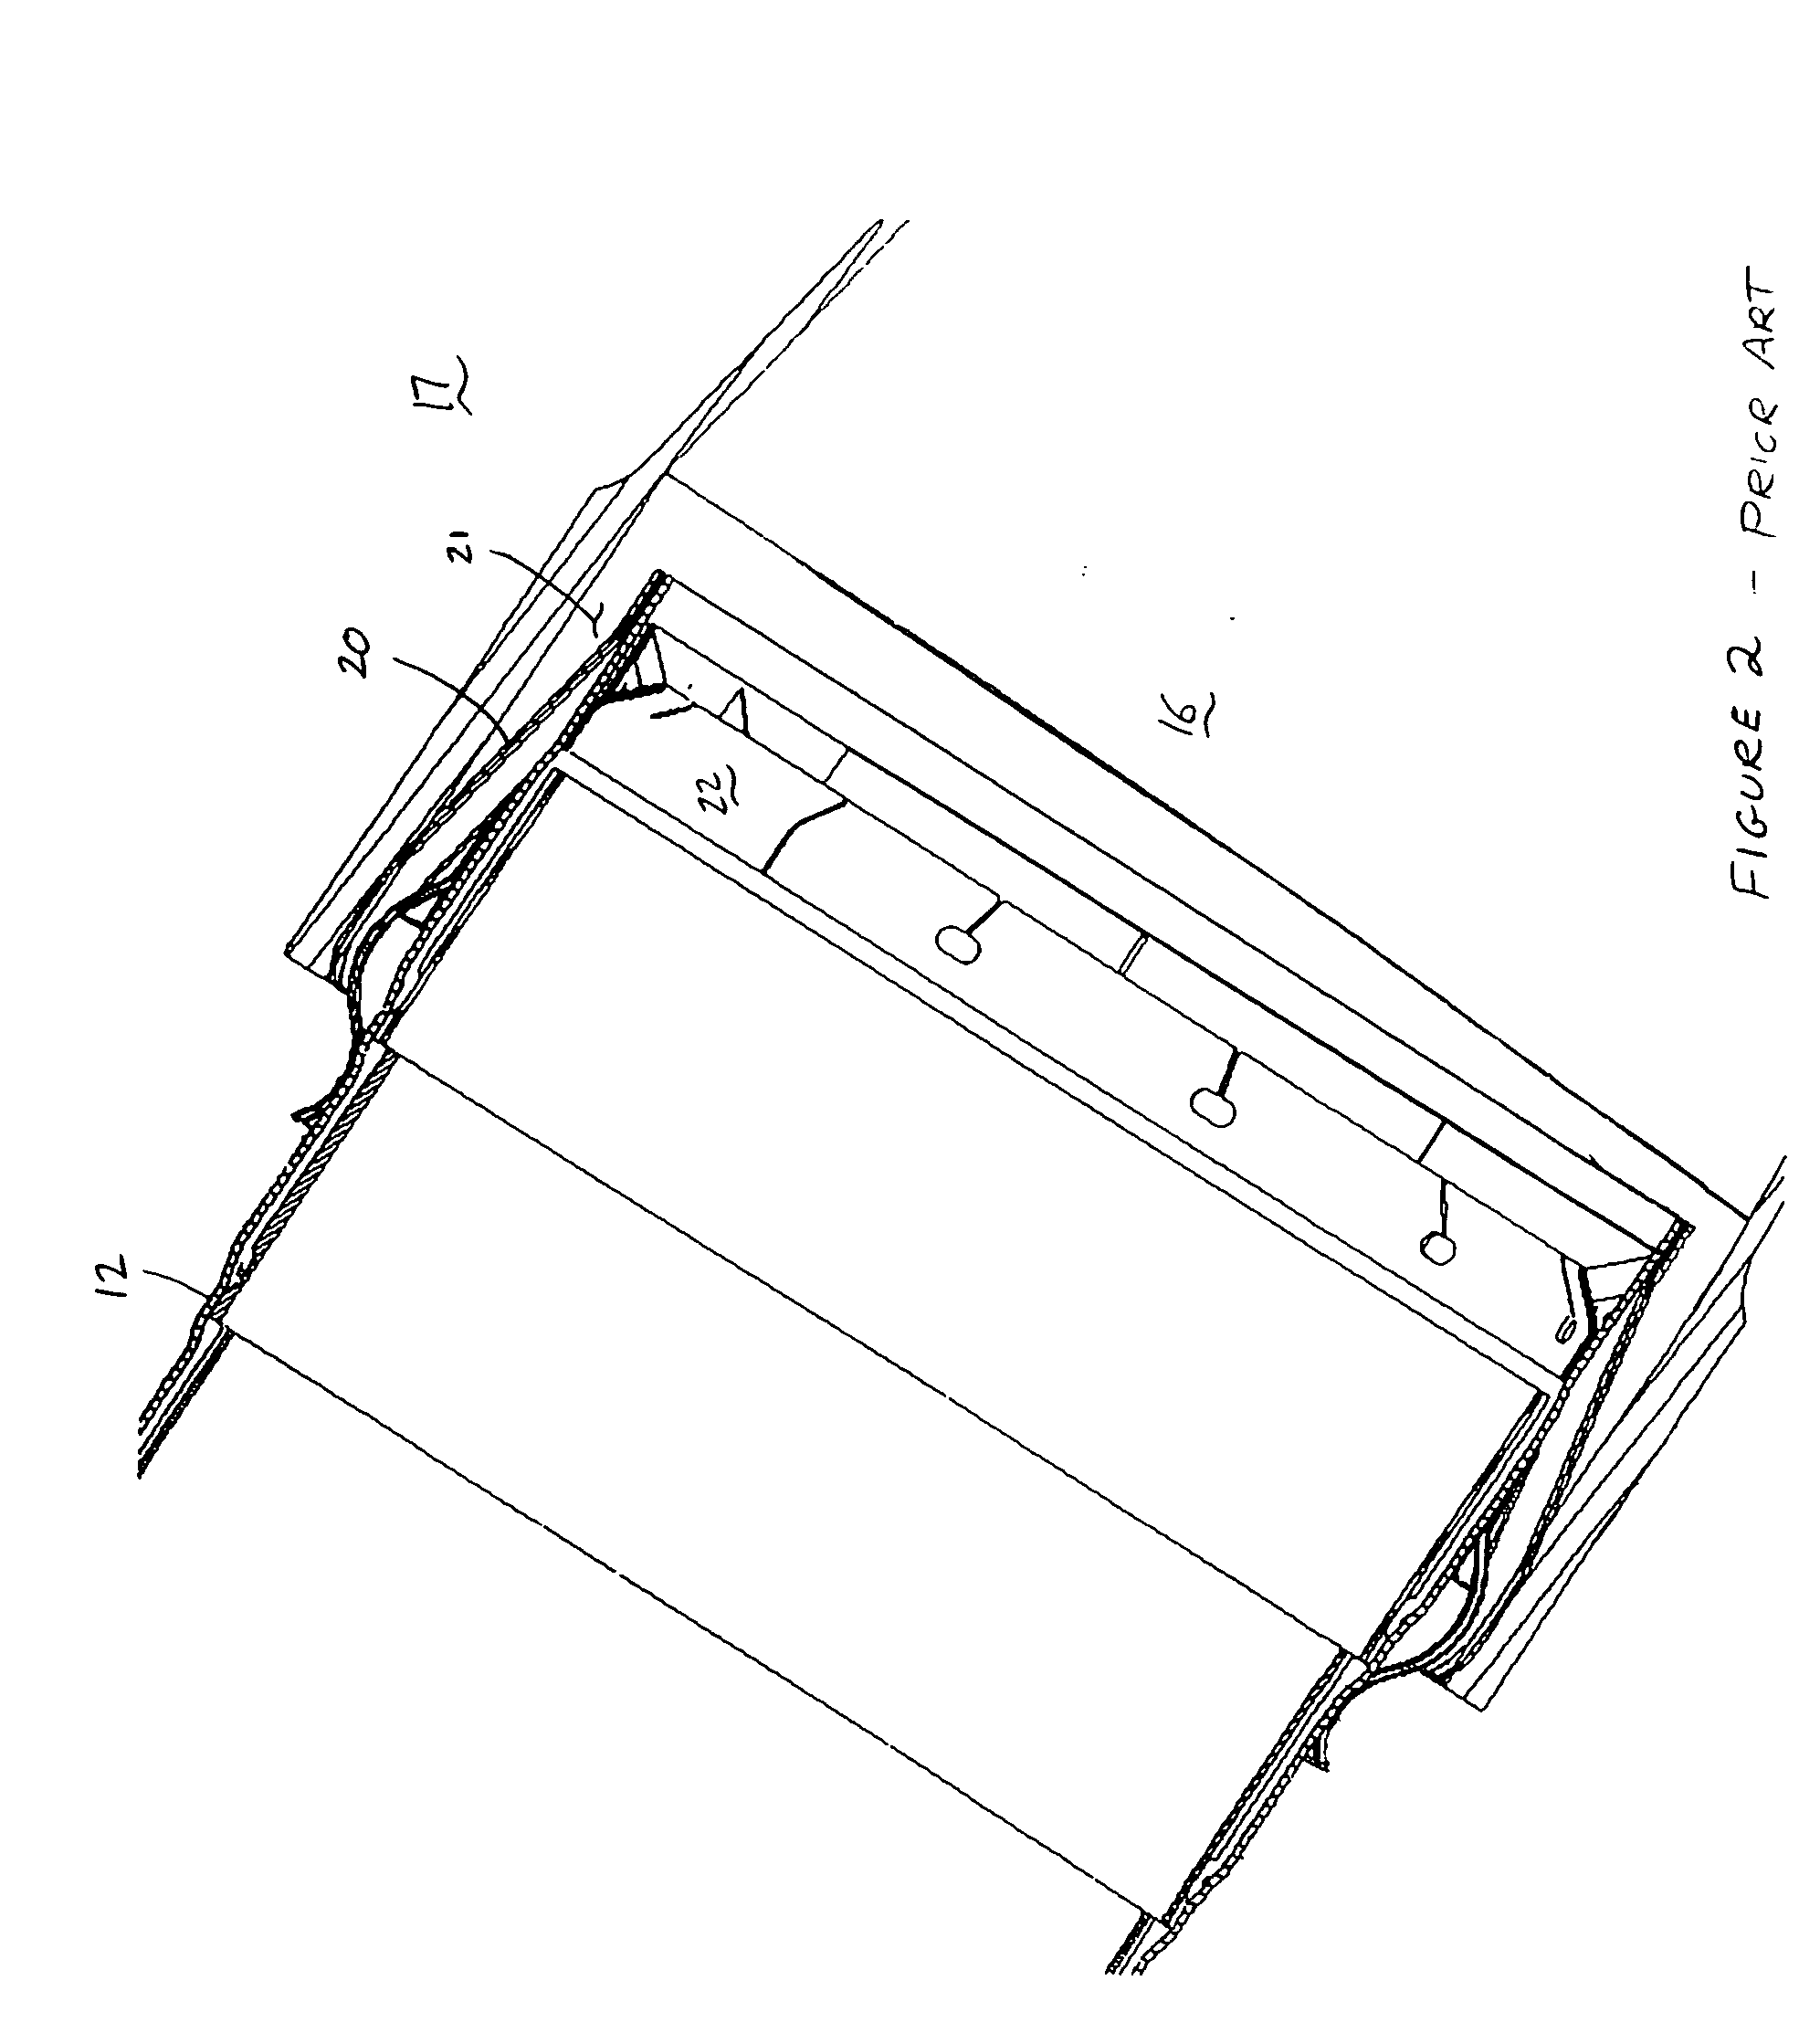 Cooling and sealing design for a gas turbine combustion system